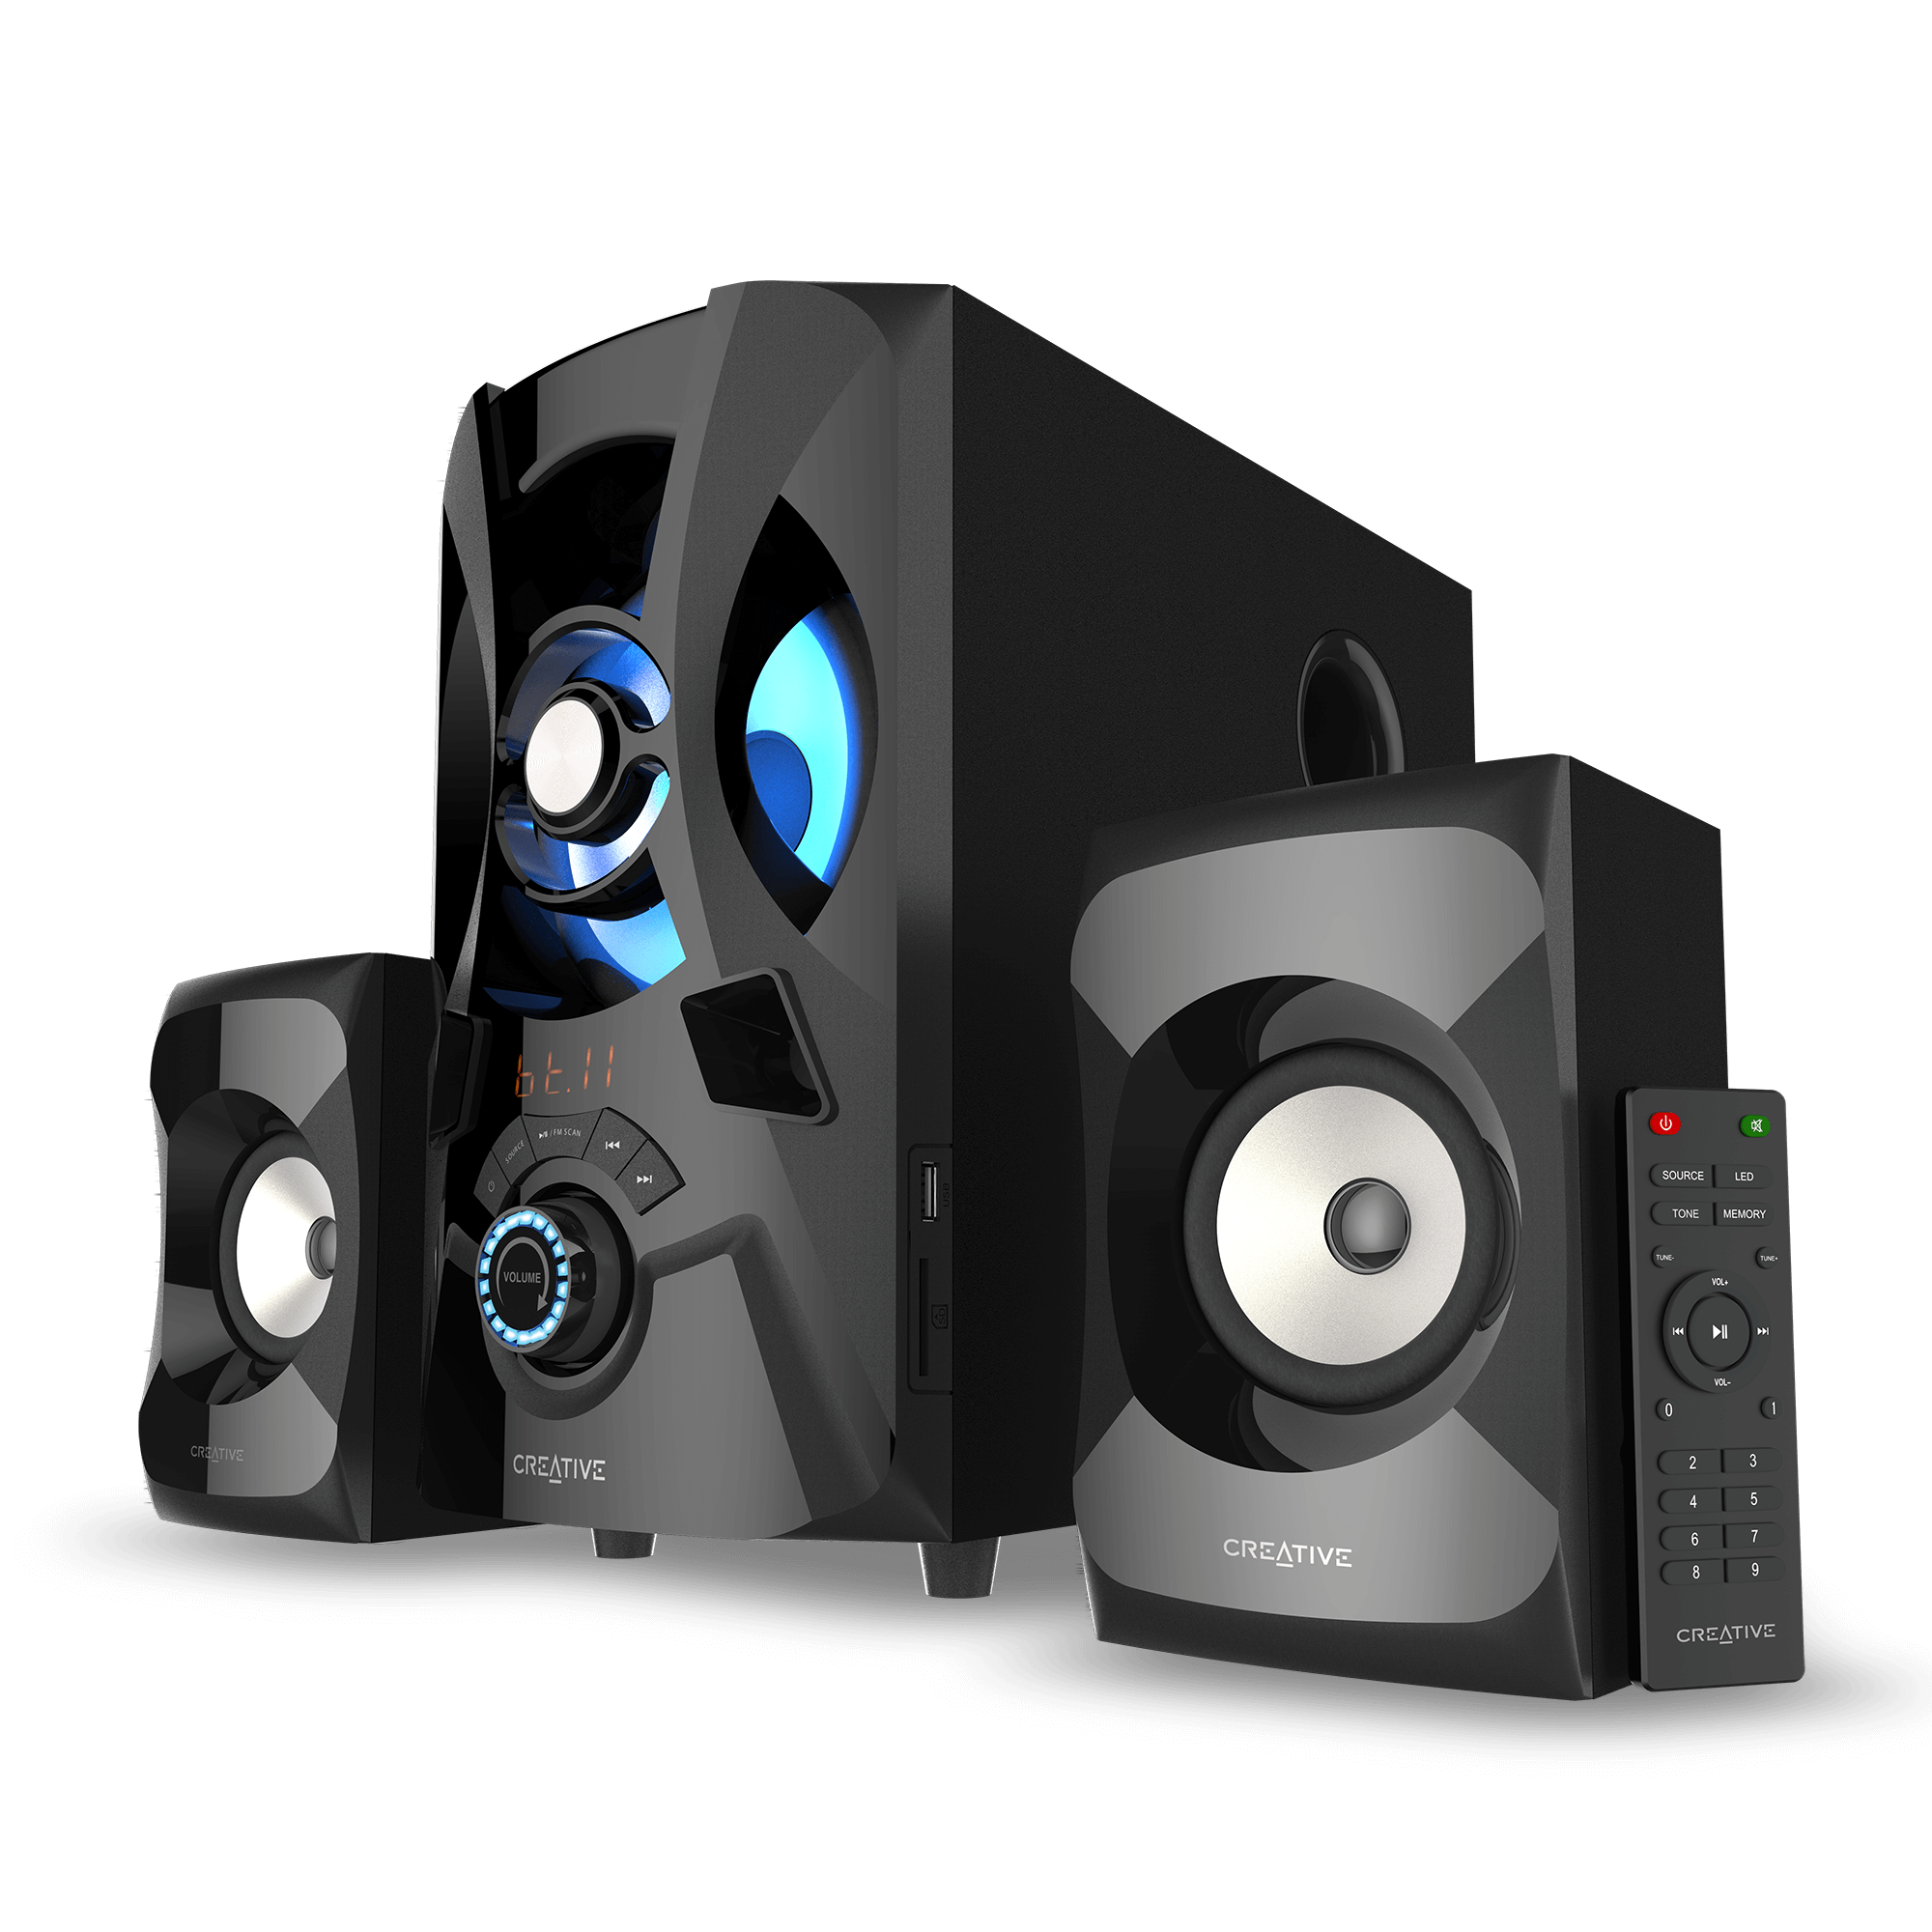 Subwoofer Speaker System 2.1 Home Audio Stereo Bass Sound Gaming TV PC Computer 